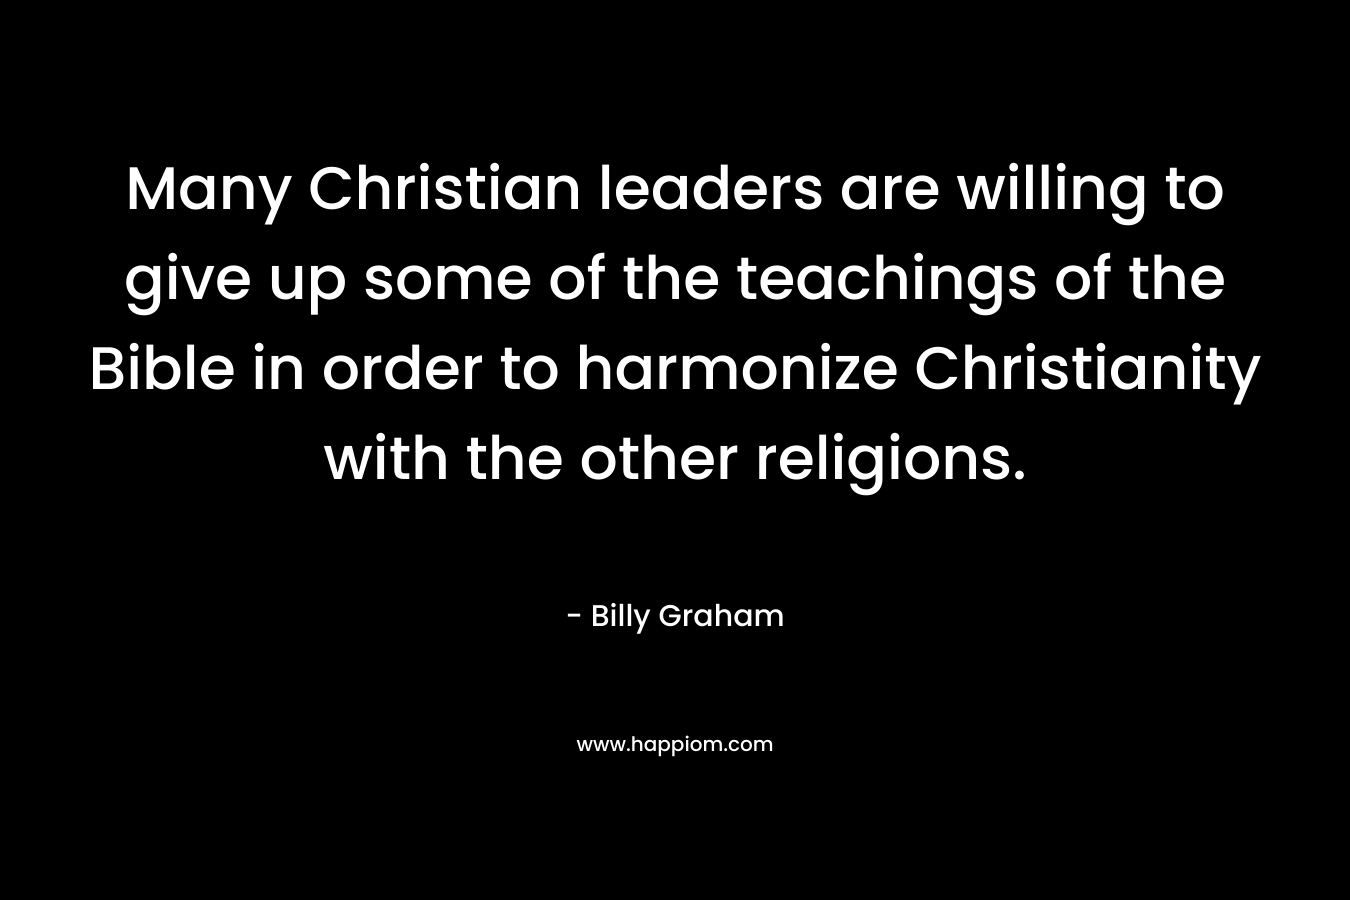 Many Christian leaders are willing to give up some of the teachings of the Bible in order to harmonize Christianity with the other religions. – Billy Graham